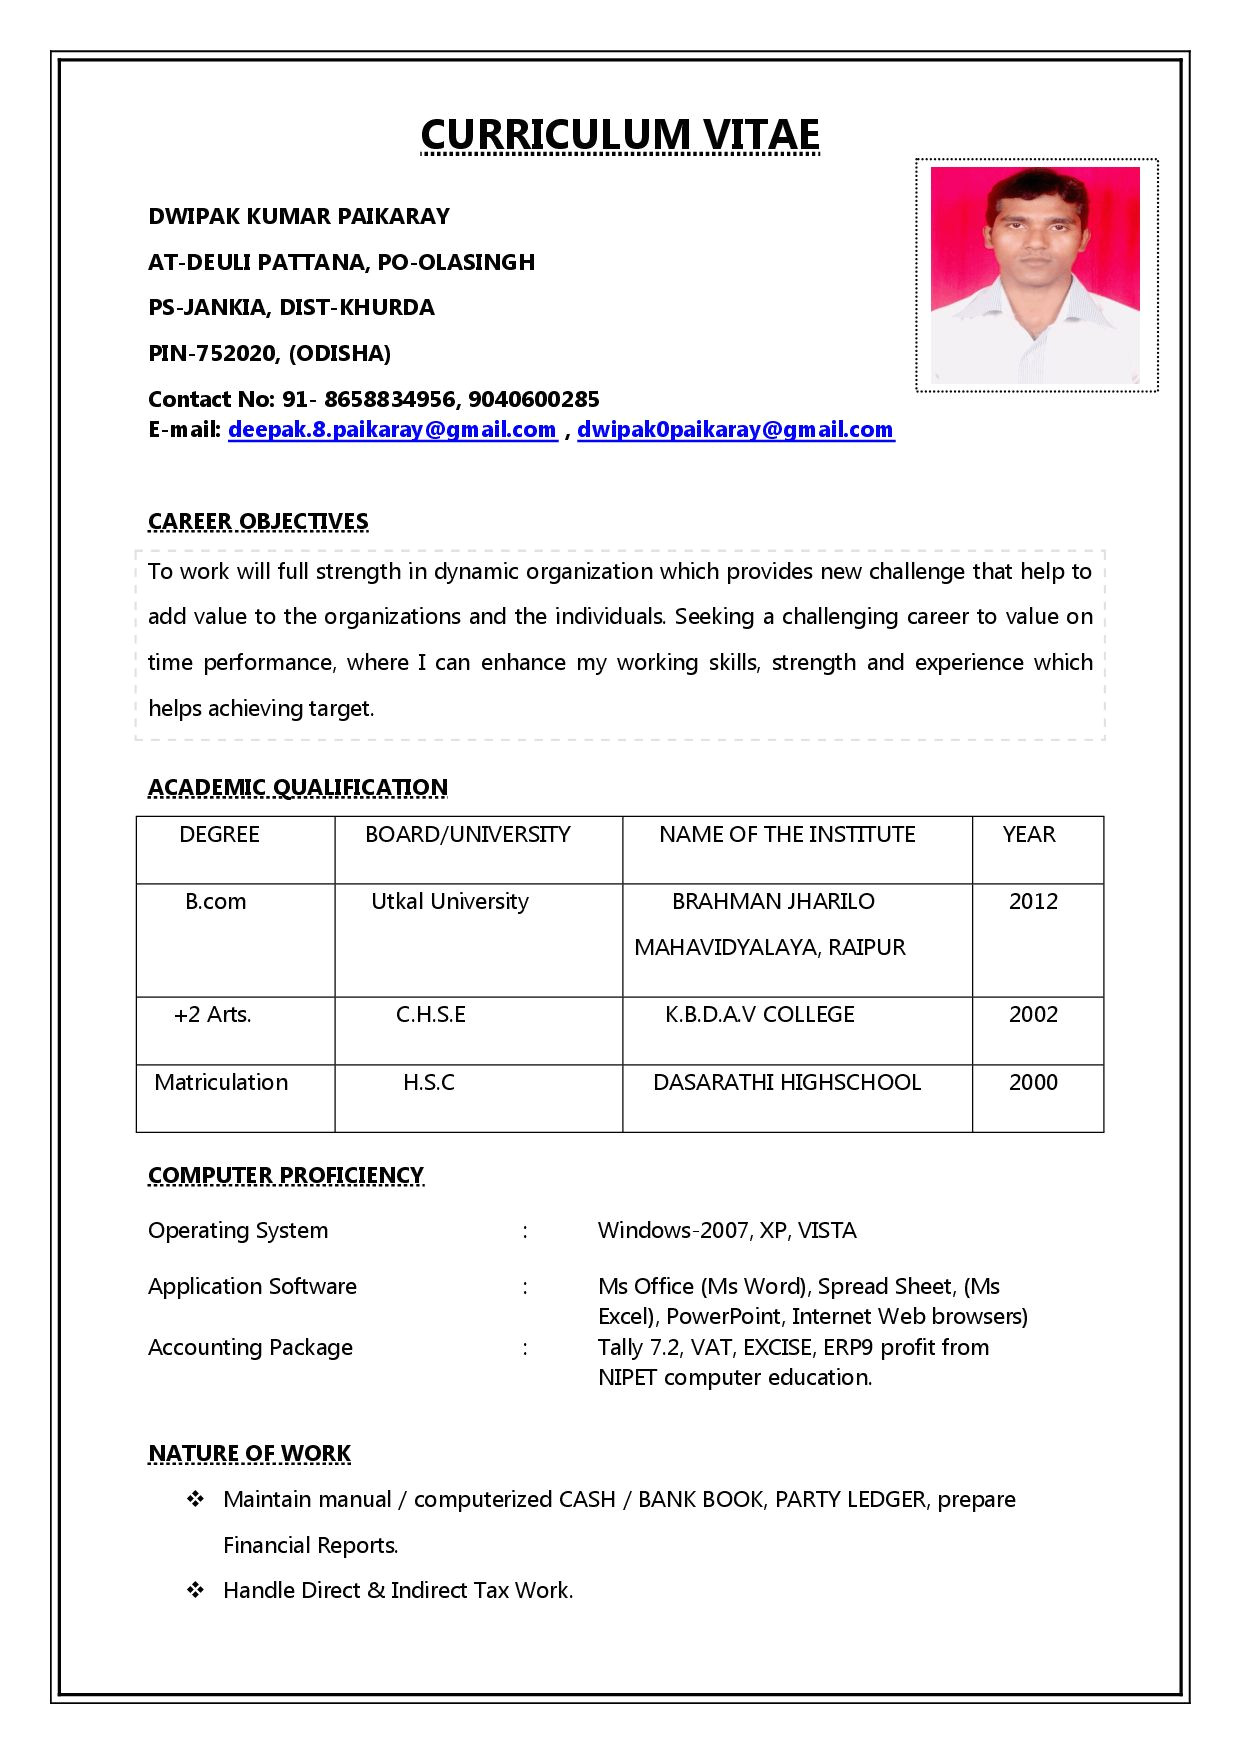 How to format A Job Resume Job Interview 3 Resume format Job Resume format